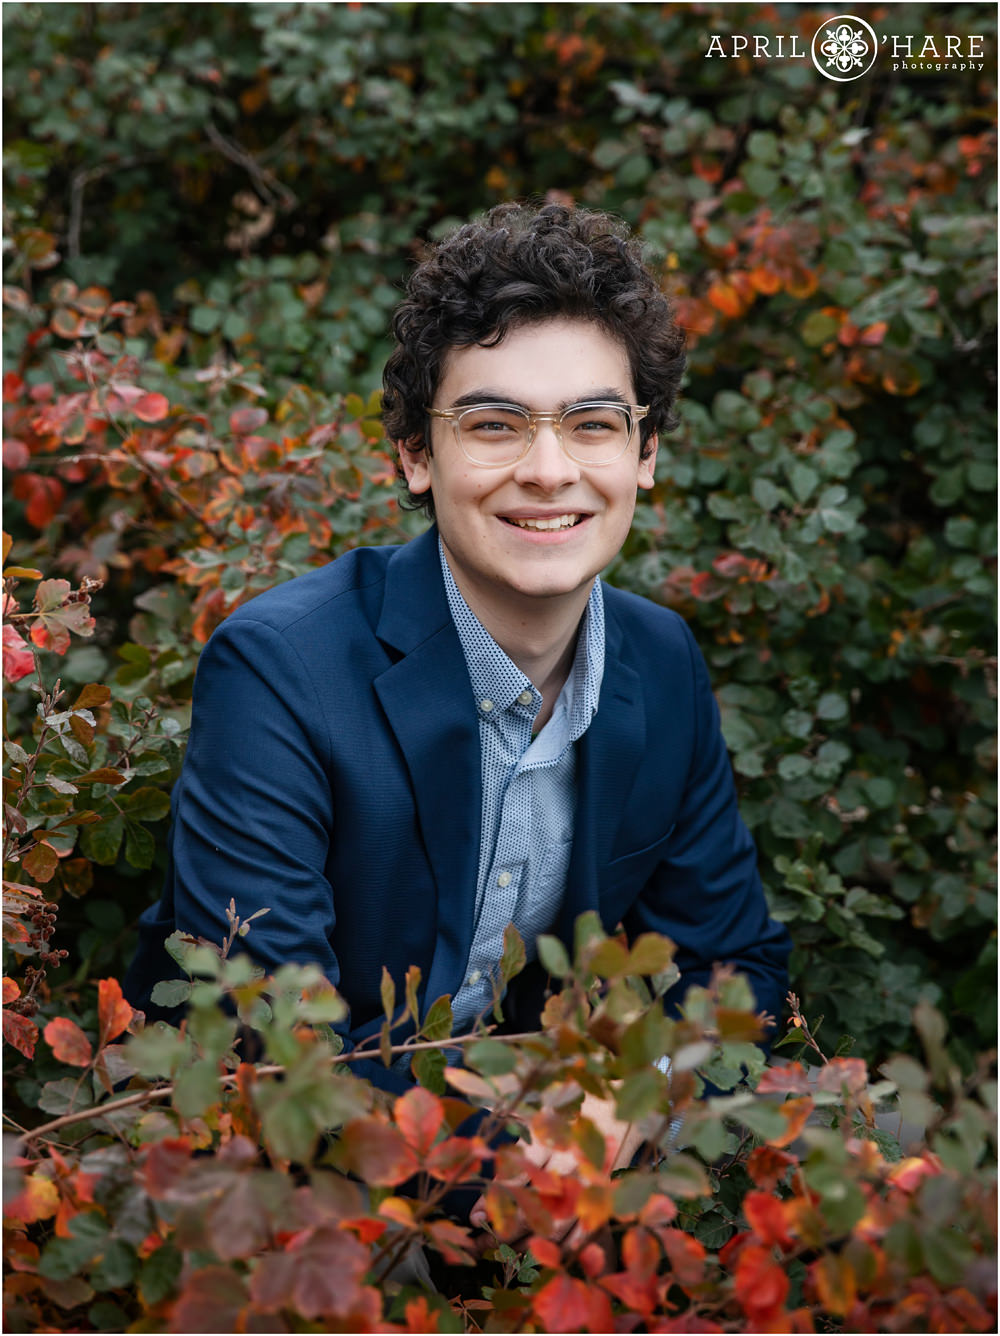 Beautiful fall color foliage provides scenery for a senior boy with dark curly hair and glasses to pose in at his downtown Denver senior photo session